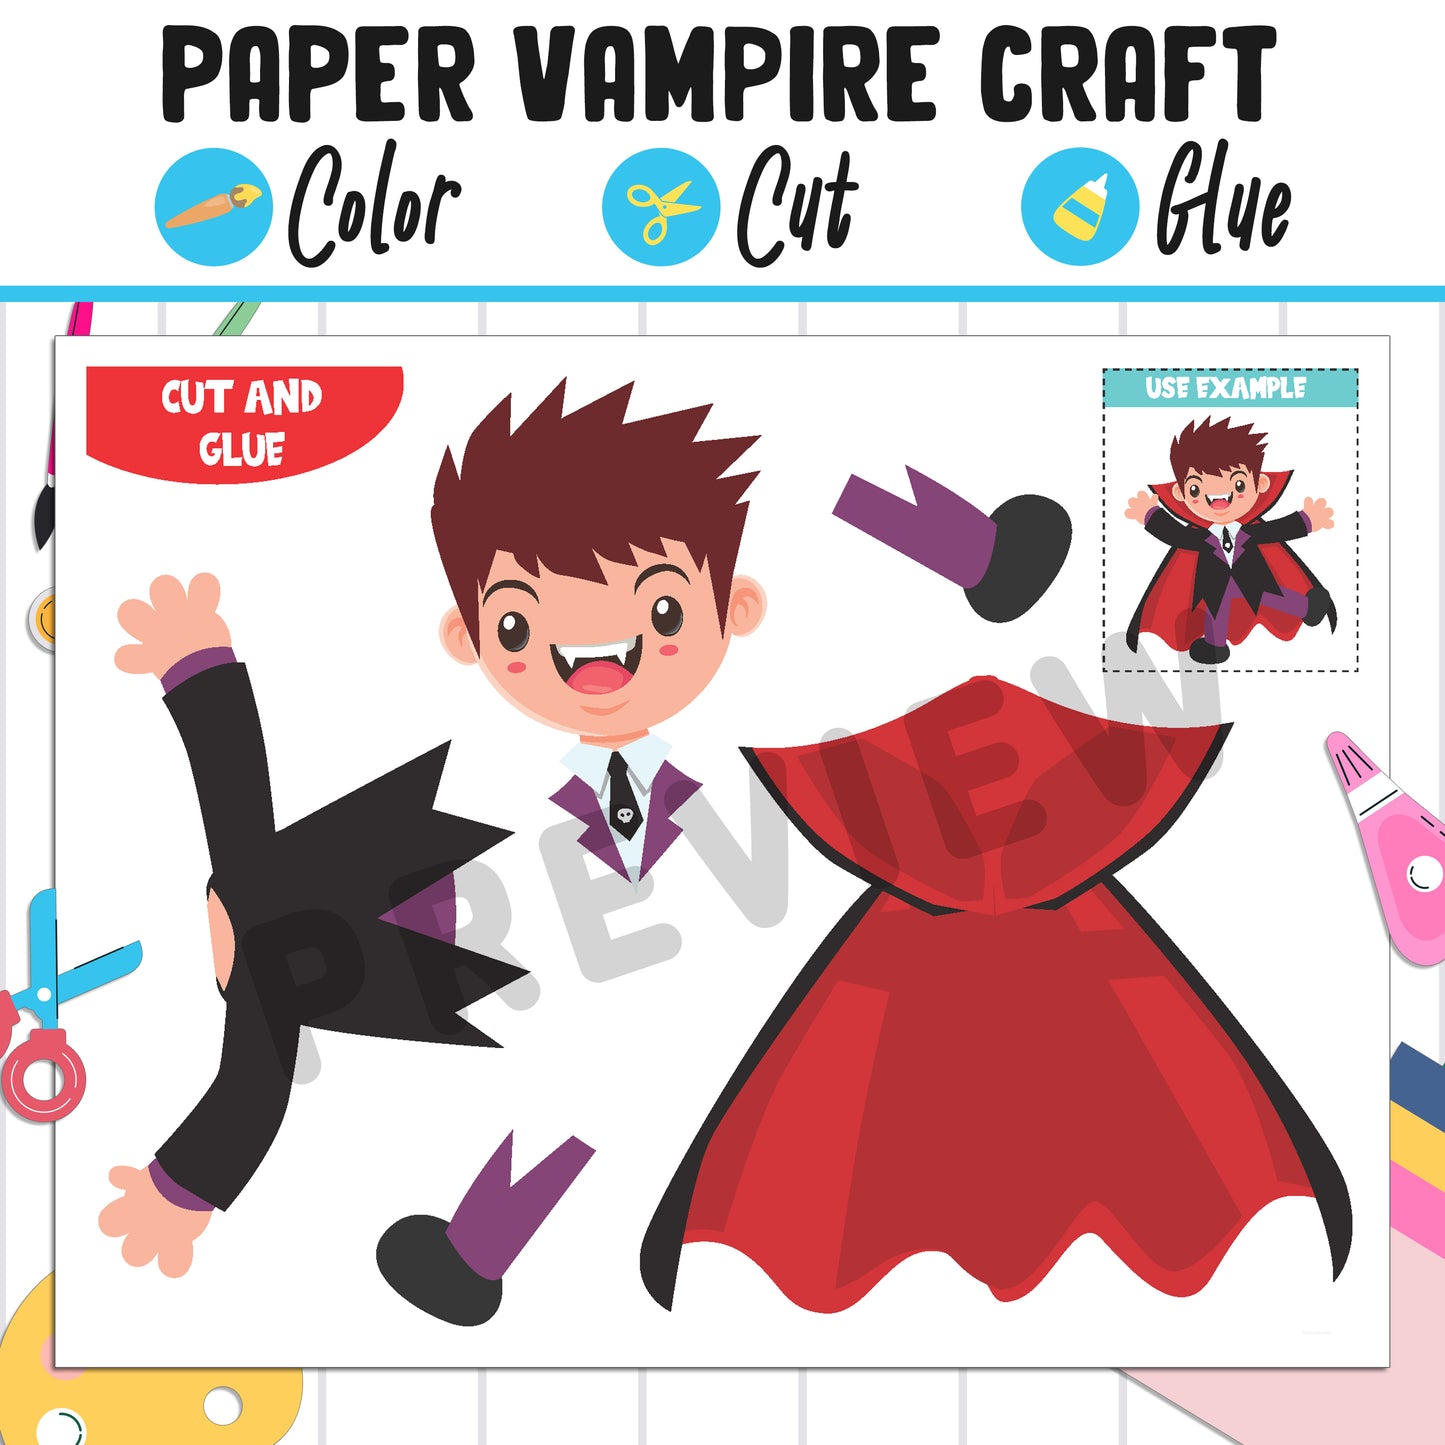 Paper Vampire Craft for Kids: Color, Cut, and Glue, a Fun Activity for Pre K to 2nd Grade, PDF Instant Download